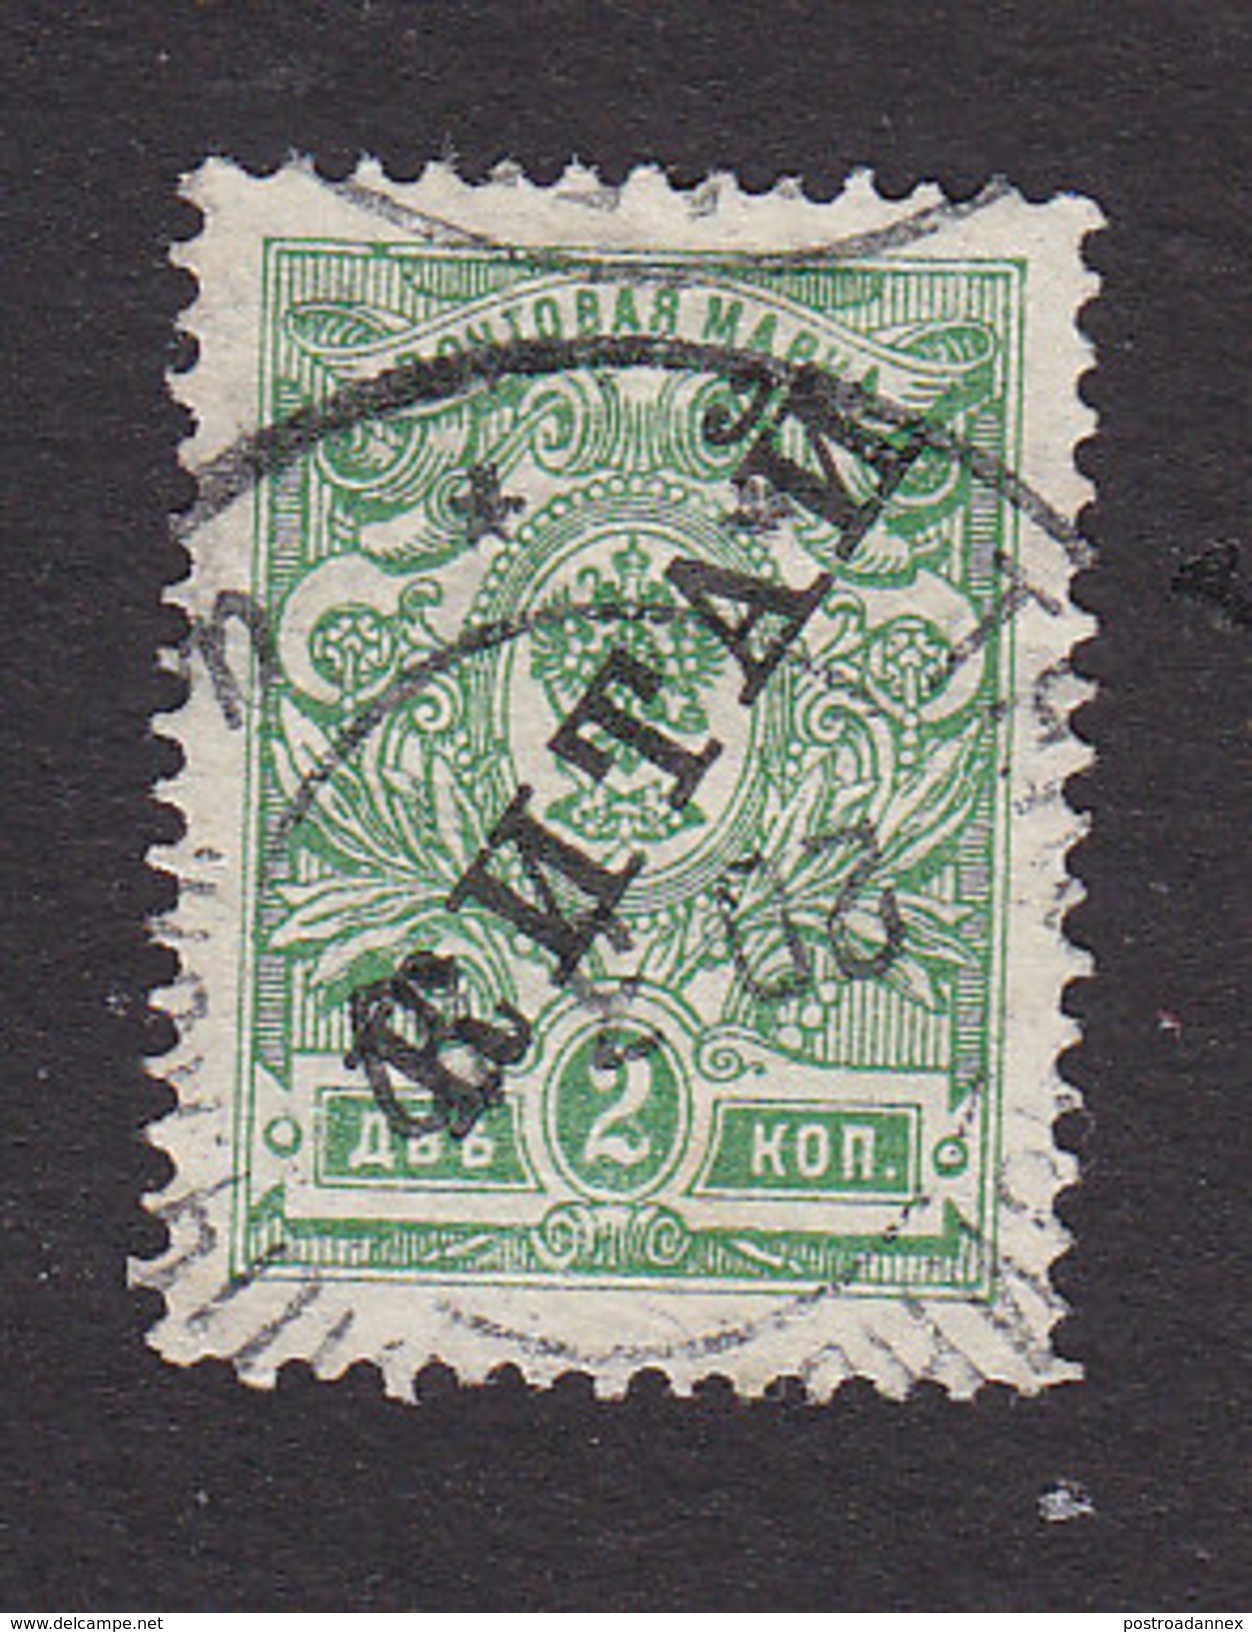 Russian Offices In China, Scott #26, Used, Arms Overprinted, Issued 1910 - China